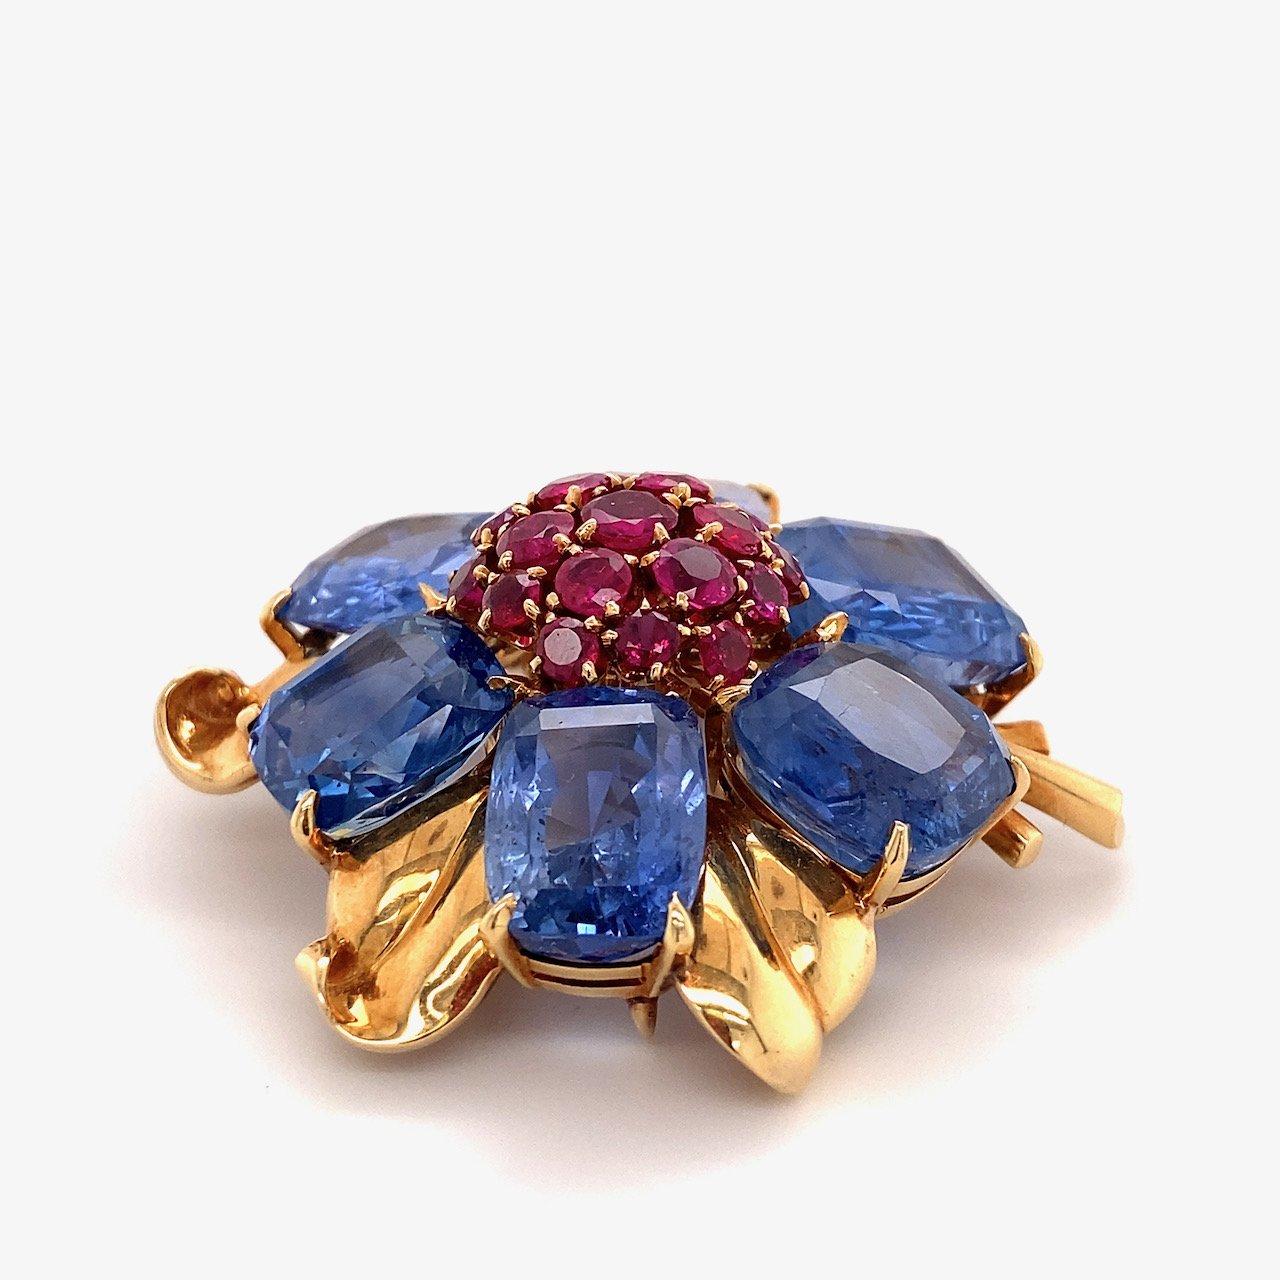 Cushion Cut Vintage Van Cleef & Arpels Blue Sapphire & Ruby Brooch, 18KT Yellow Gold For Sale